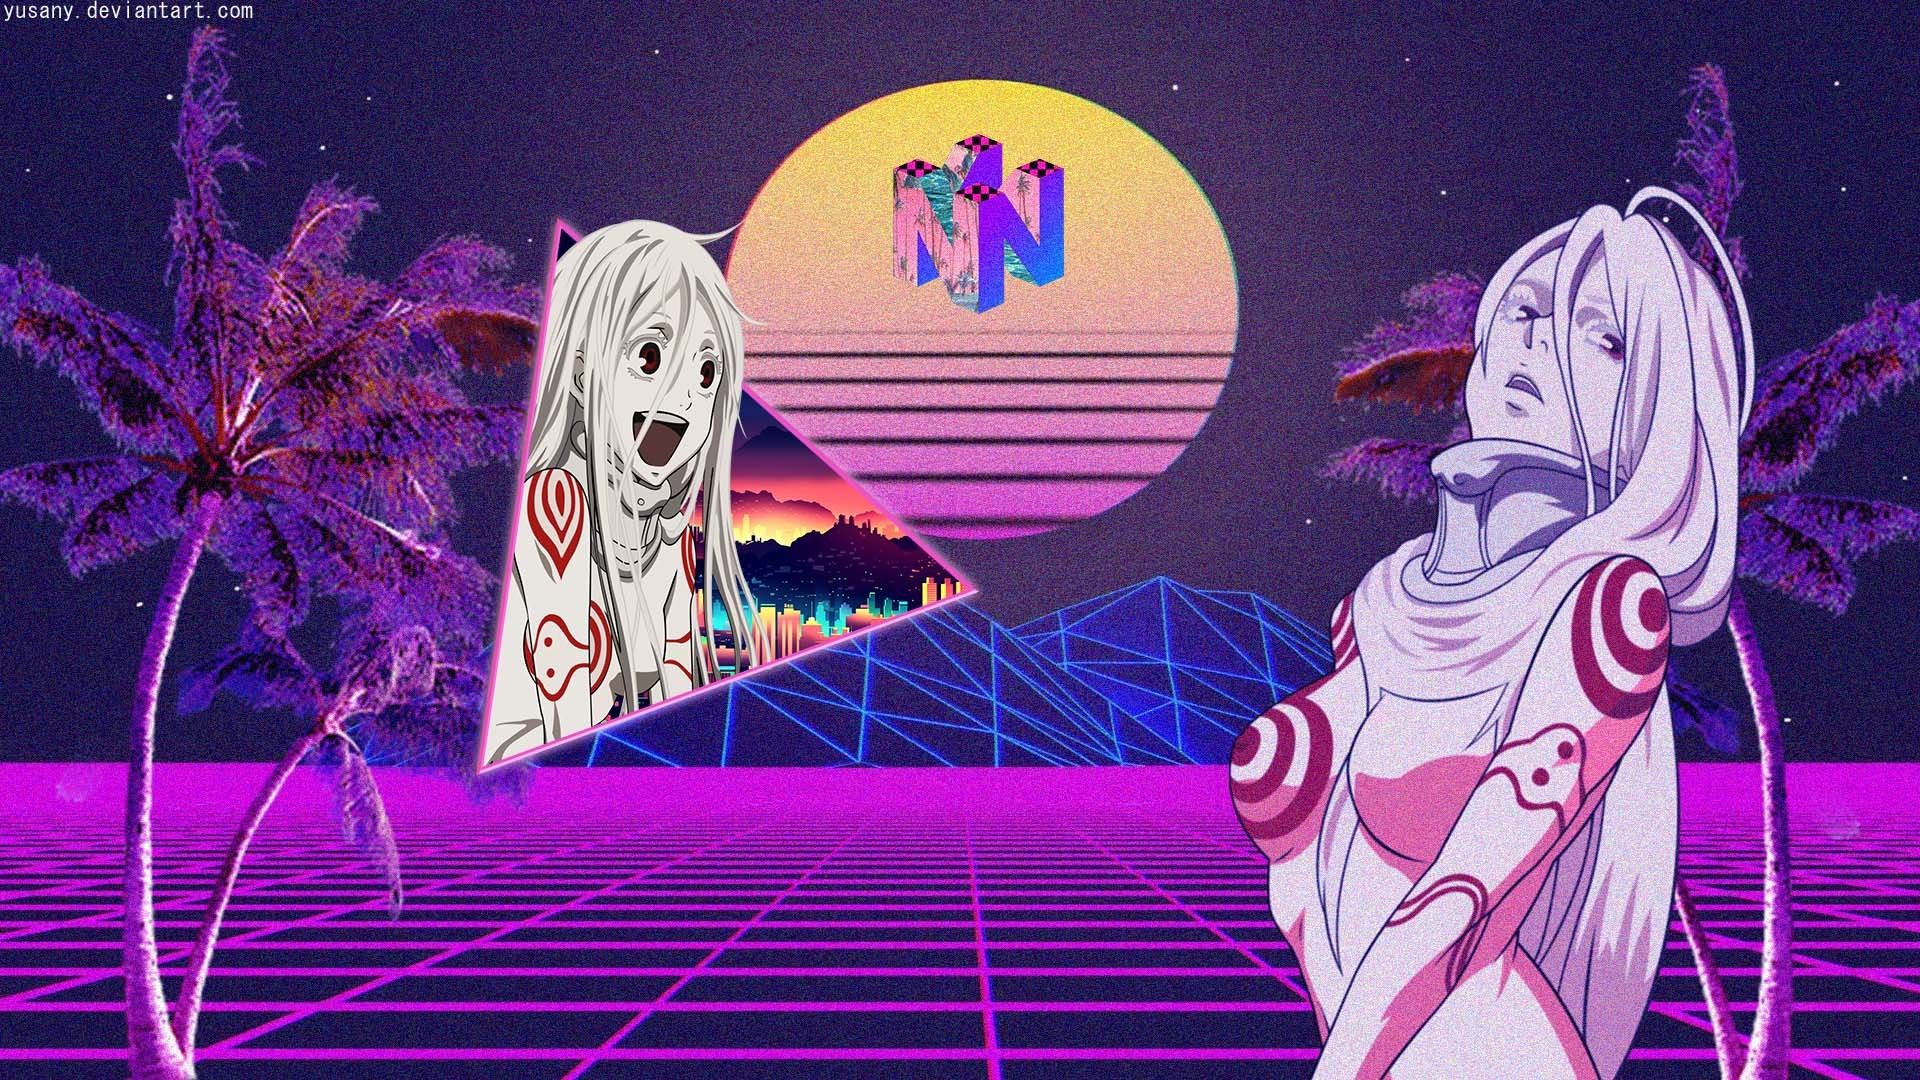 Unique Aesthetic Wallpapers Anime Retro Pictures ~ Wallaper Aesthetic